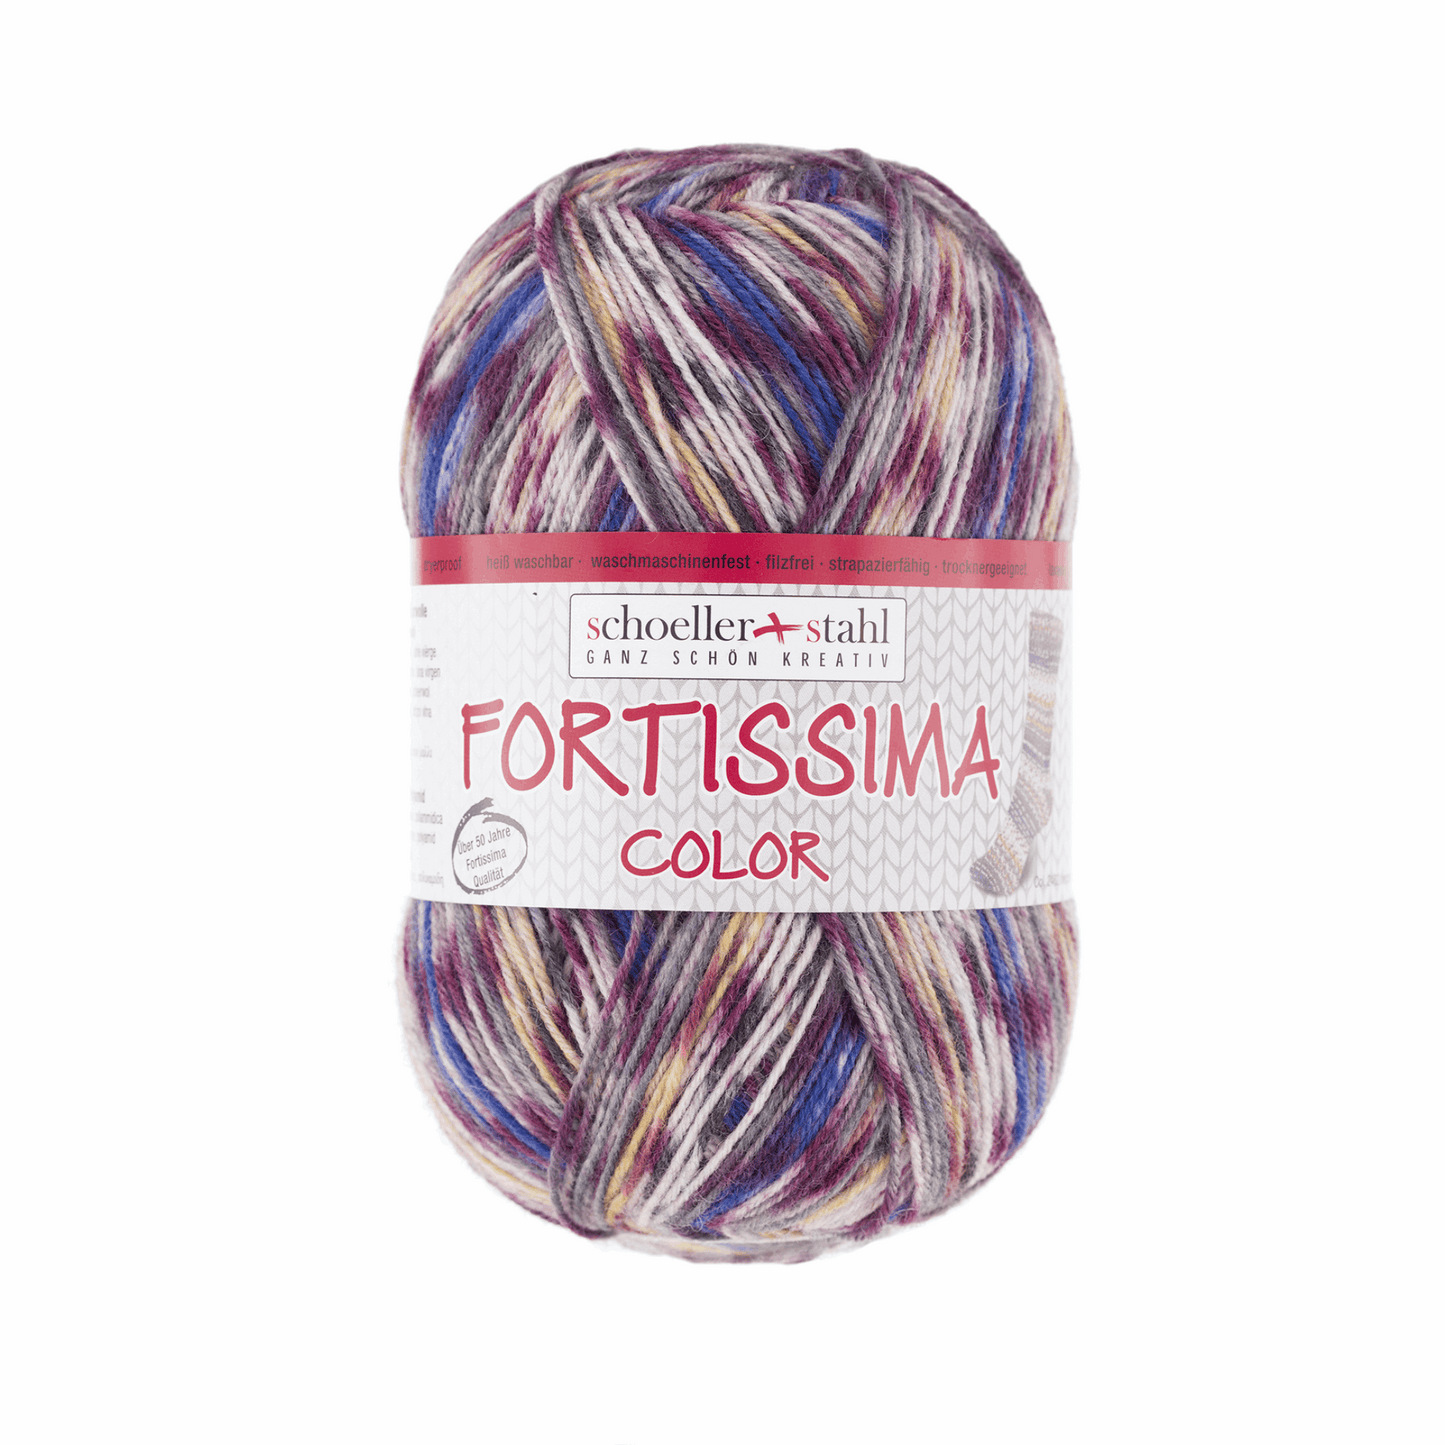 Fortissima socka 4-ply, 90028, color 2482, autumn leaves